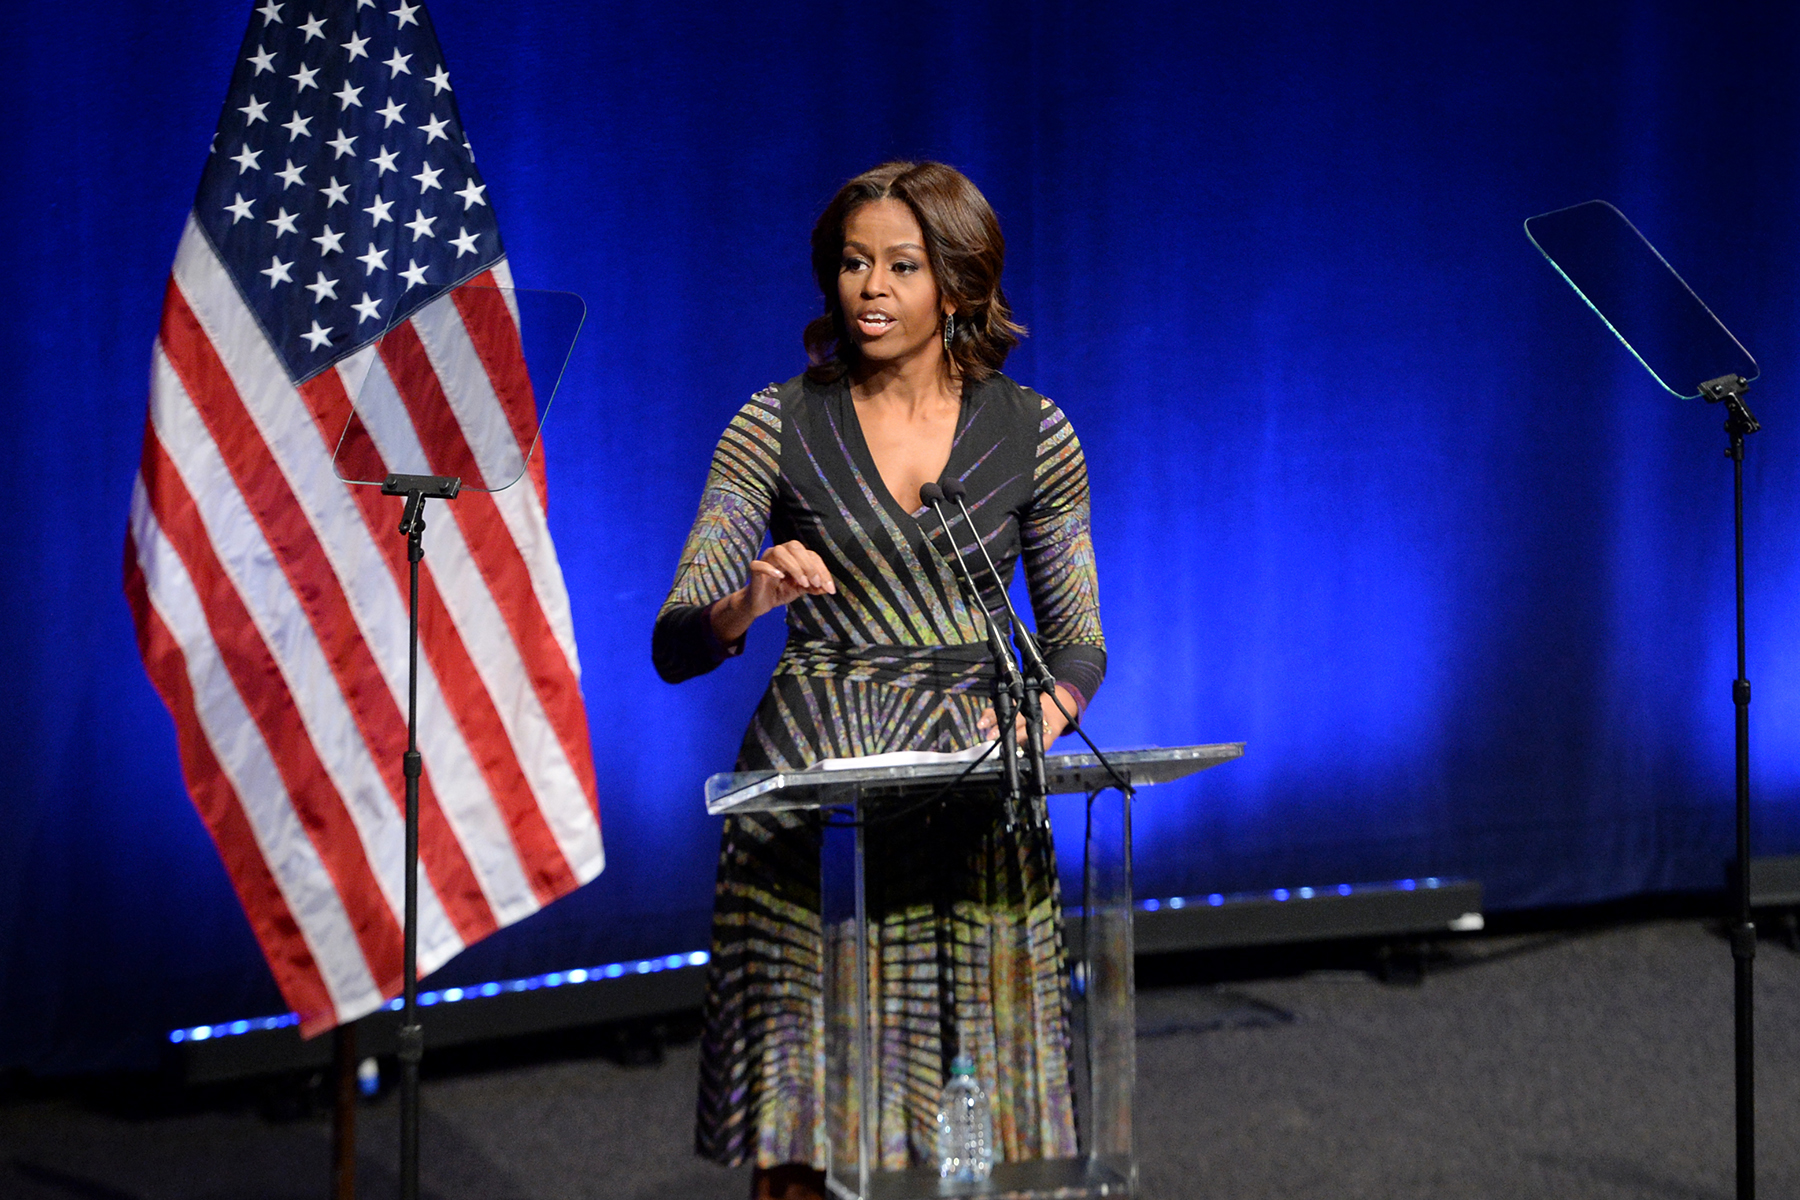 Michelle Obama is Coming To Brooklyn As Part of 'Becoming' Book Tour